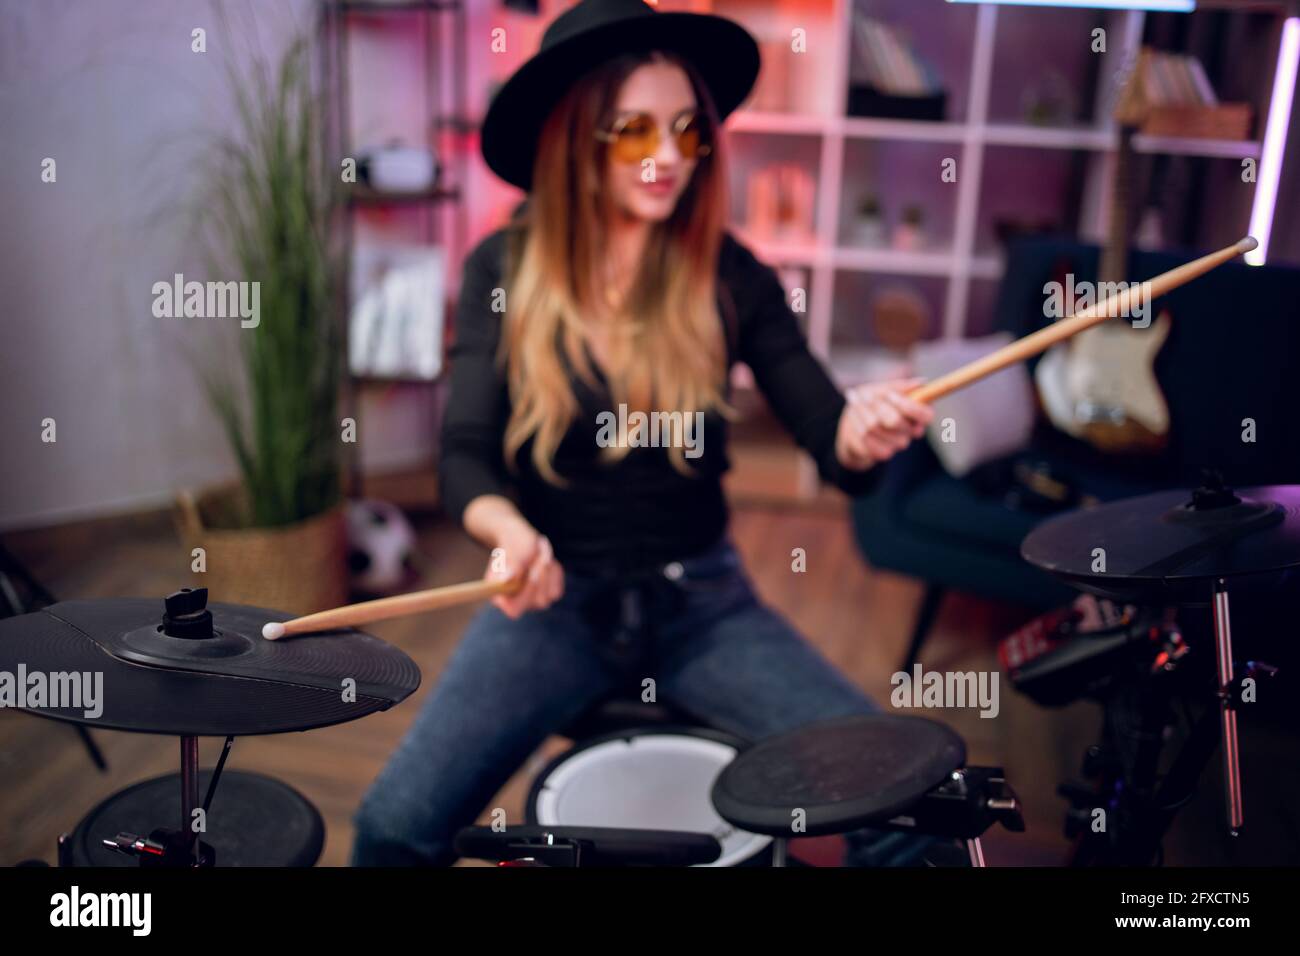 Talented female musician practising in playing electronic drums in studio. Attractive woman rehearsing alone indoors. Enjoyment from favorite hobby. Stock Photo